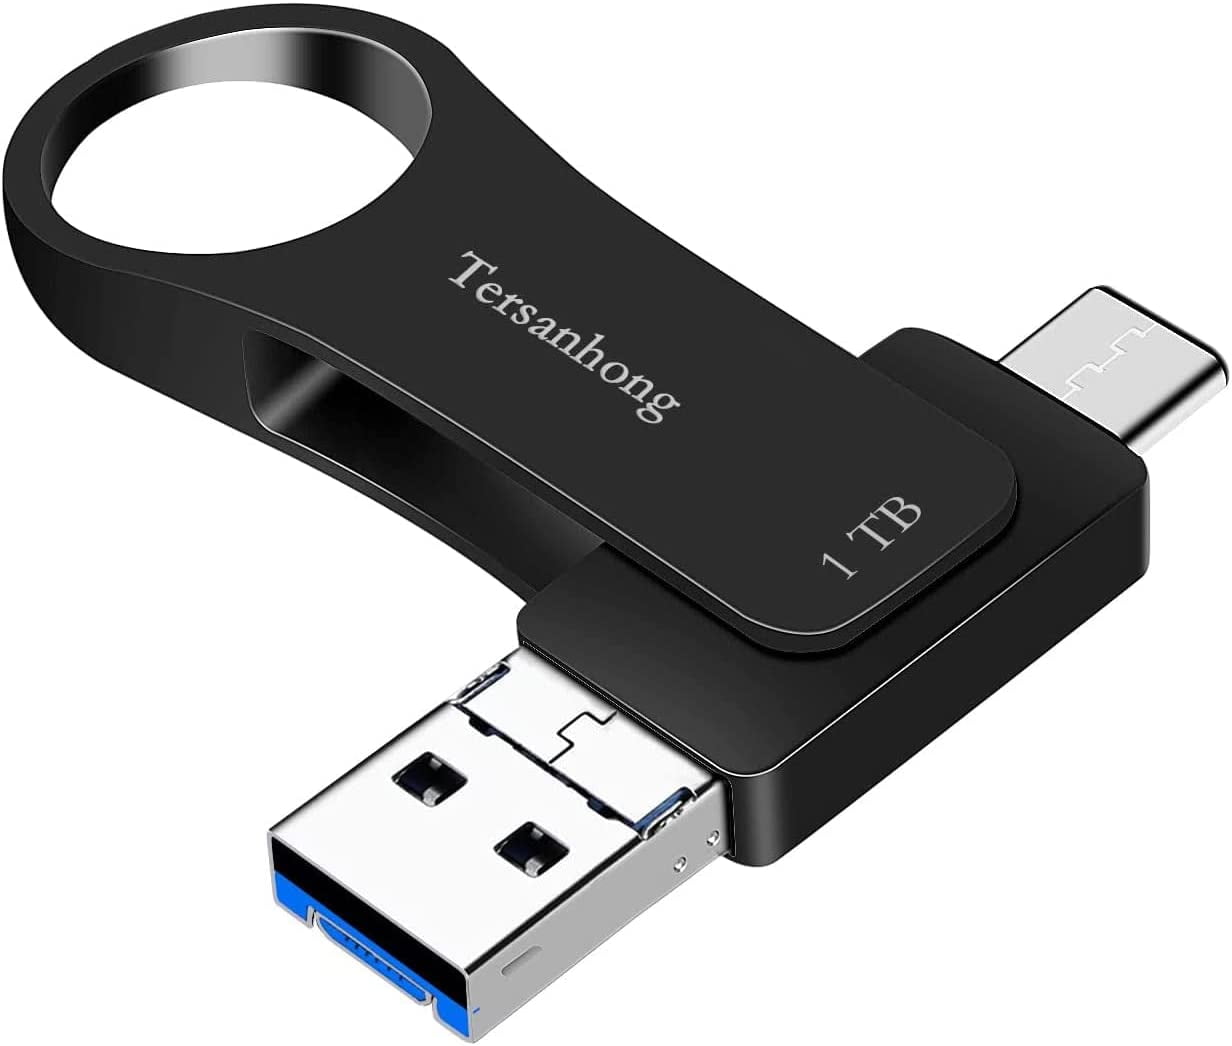 USB 3.0 Dual USB C Flash Drive 1TB,3 in 1 Type C Thumb for MacBook Android Phones Photo Stick External Date Storage for Smart Phones,Computers and Walmart.com